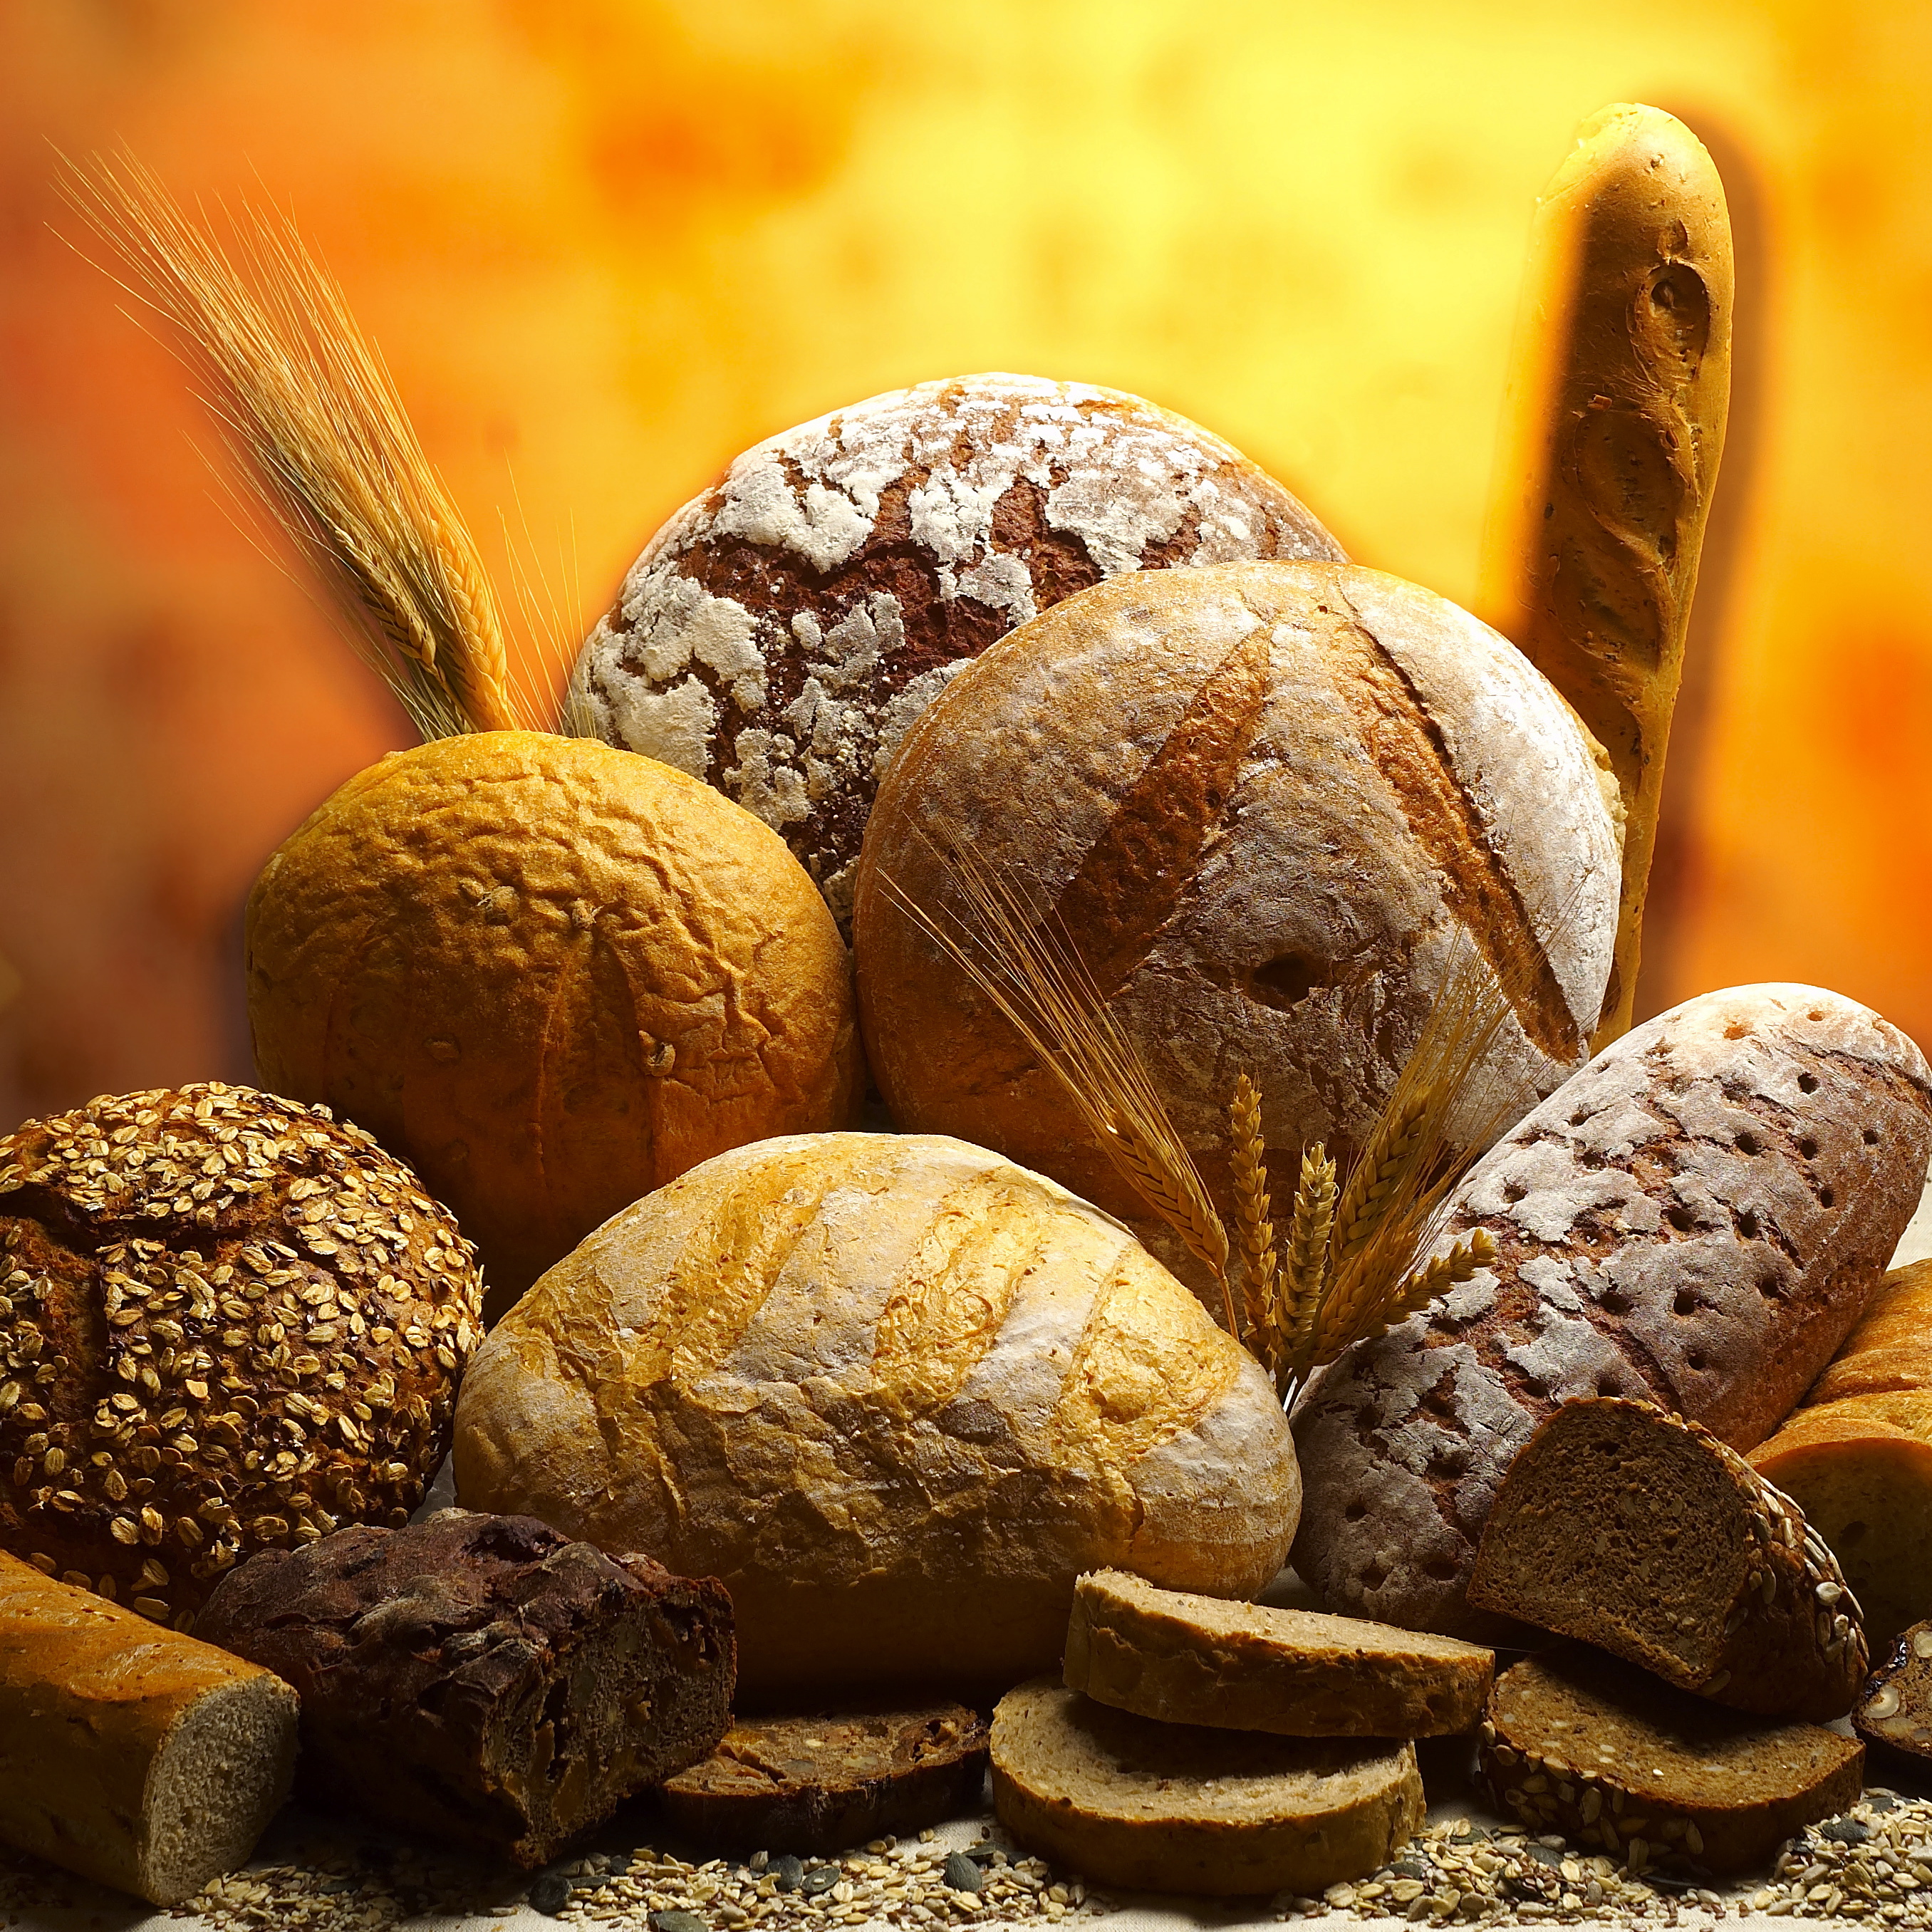 Gluten: What IS it? (And why is it so delicious?!)